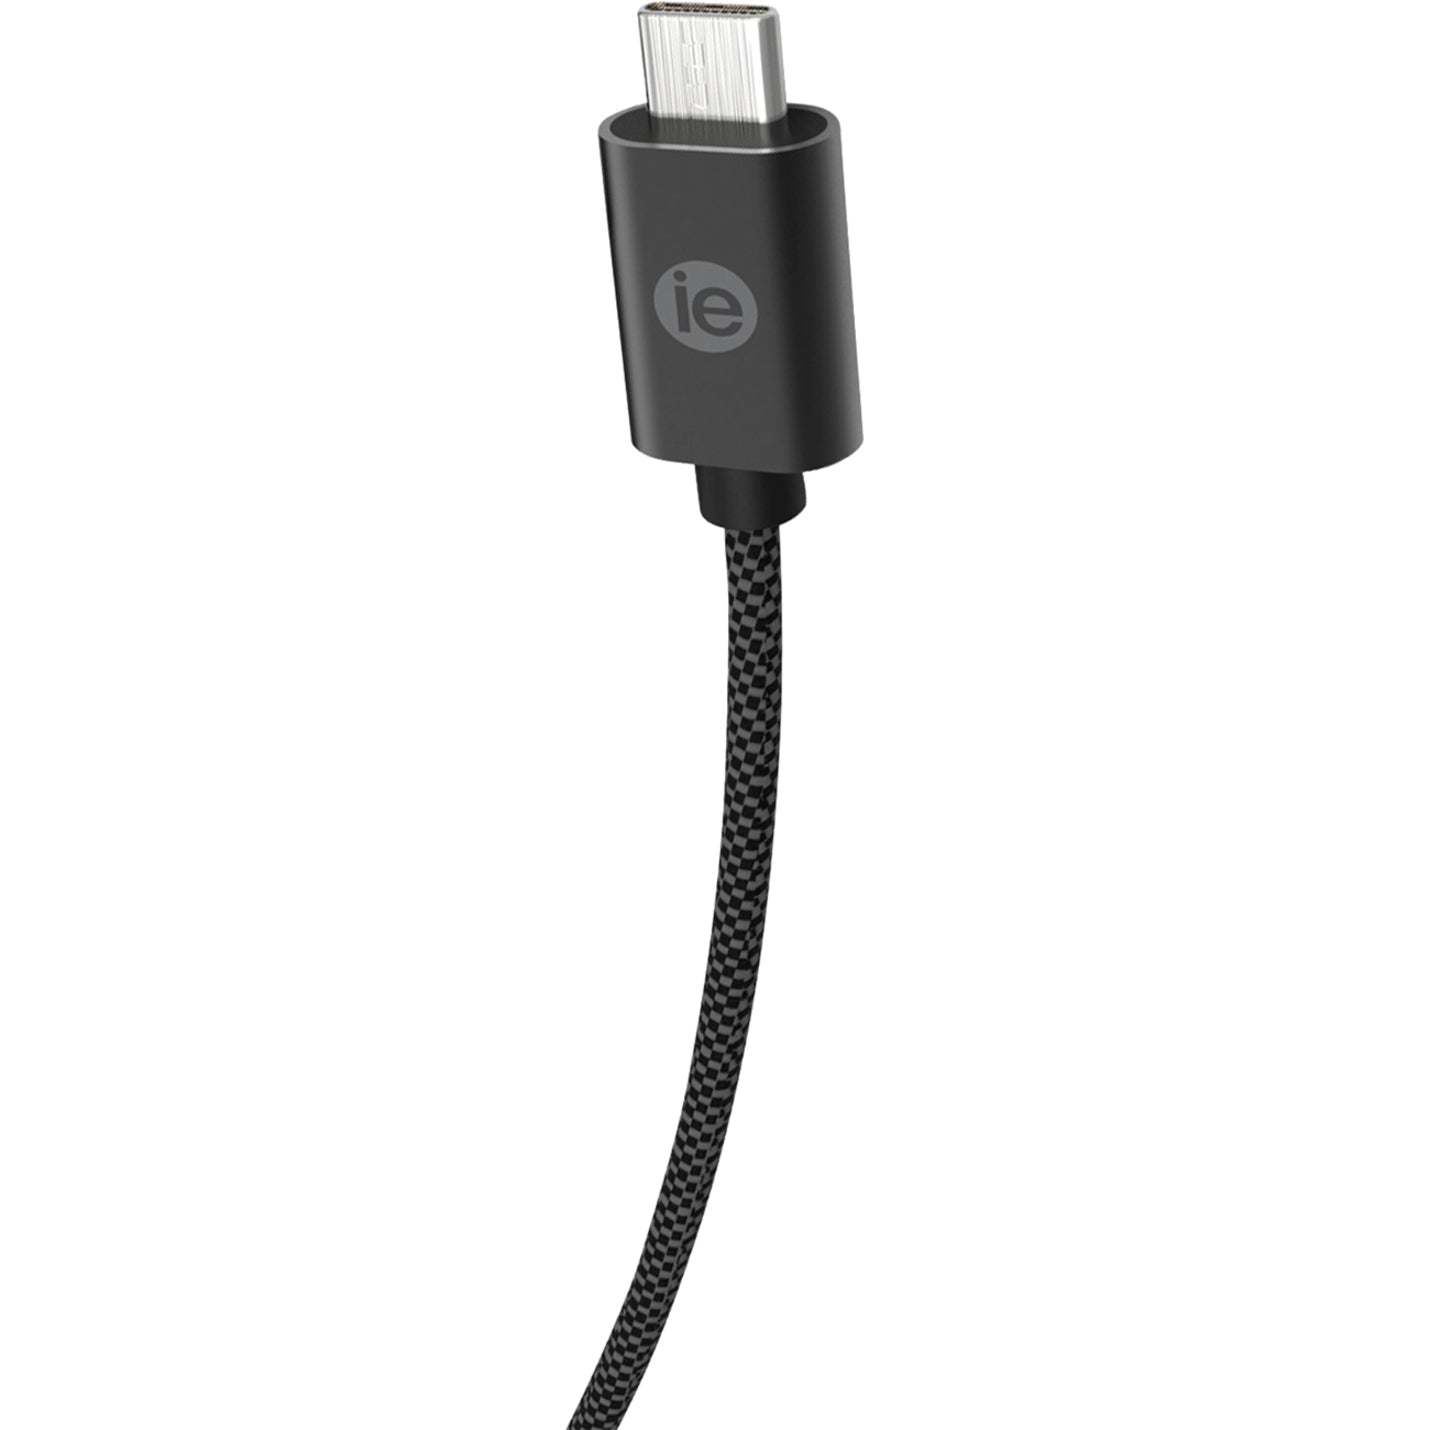 DigiPower IEN-BC6C2L-BK Lightning/USB Data Transfer Cable, Fast Charging and Data Sync